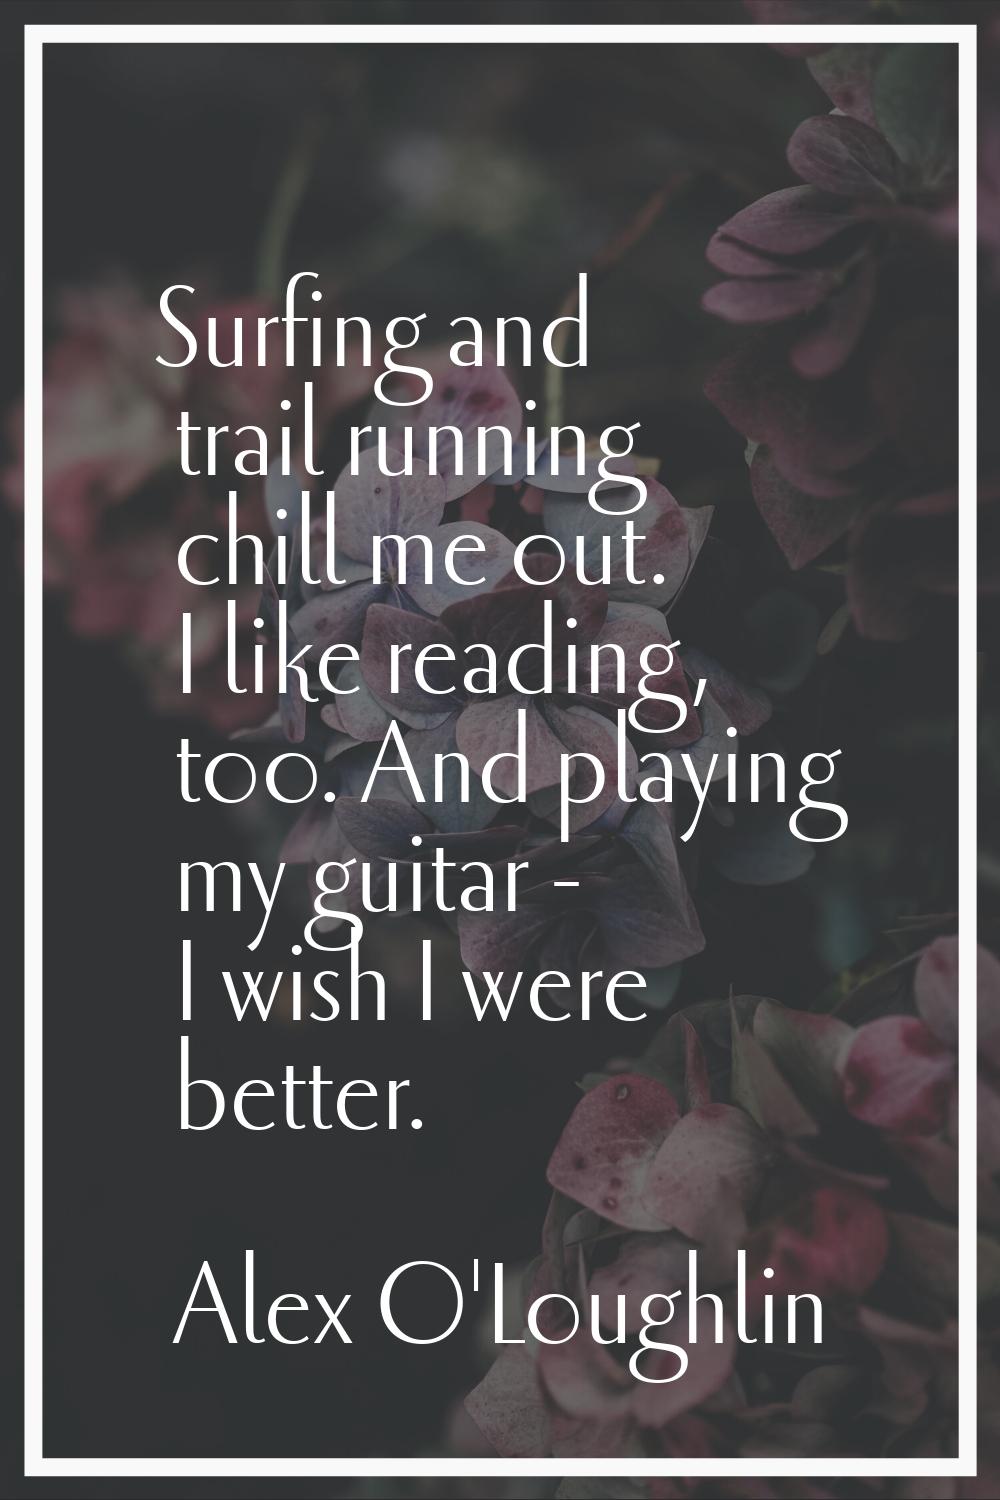 Surfing and trail running chill me out. I like reading, too. And playing my guitar - I wish I were 